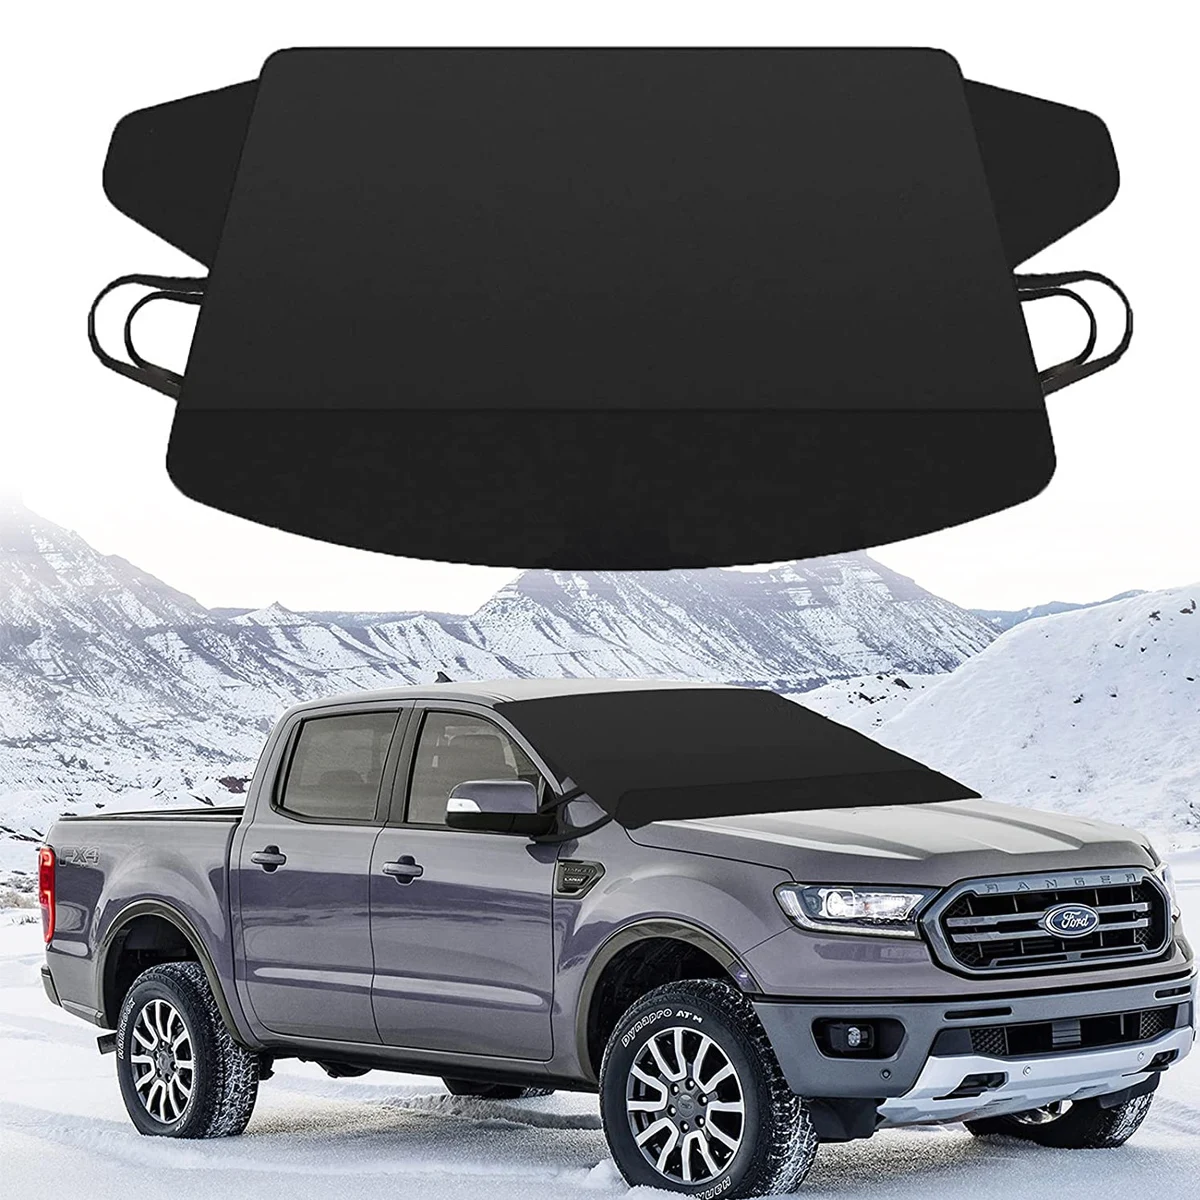 

Extra Large Windproof Windshield Snow Cover Car Shade Ice Removal All-Weather Fits Large Size Vehicle Truck Pickup Accessories